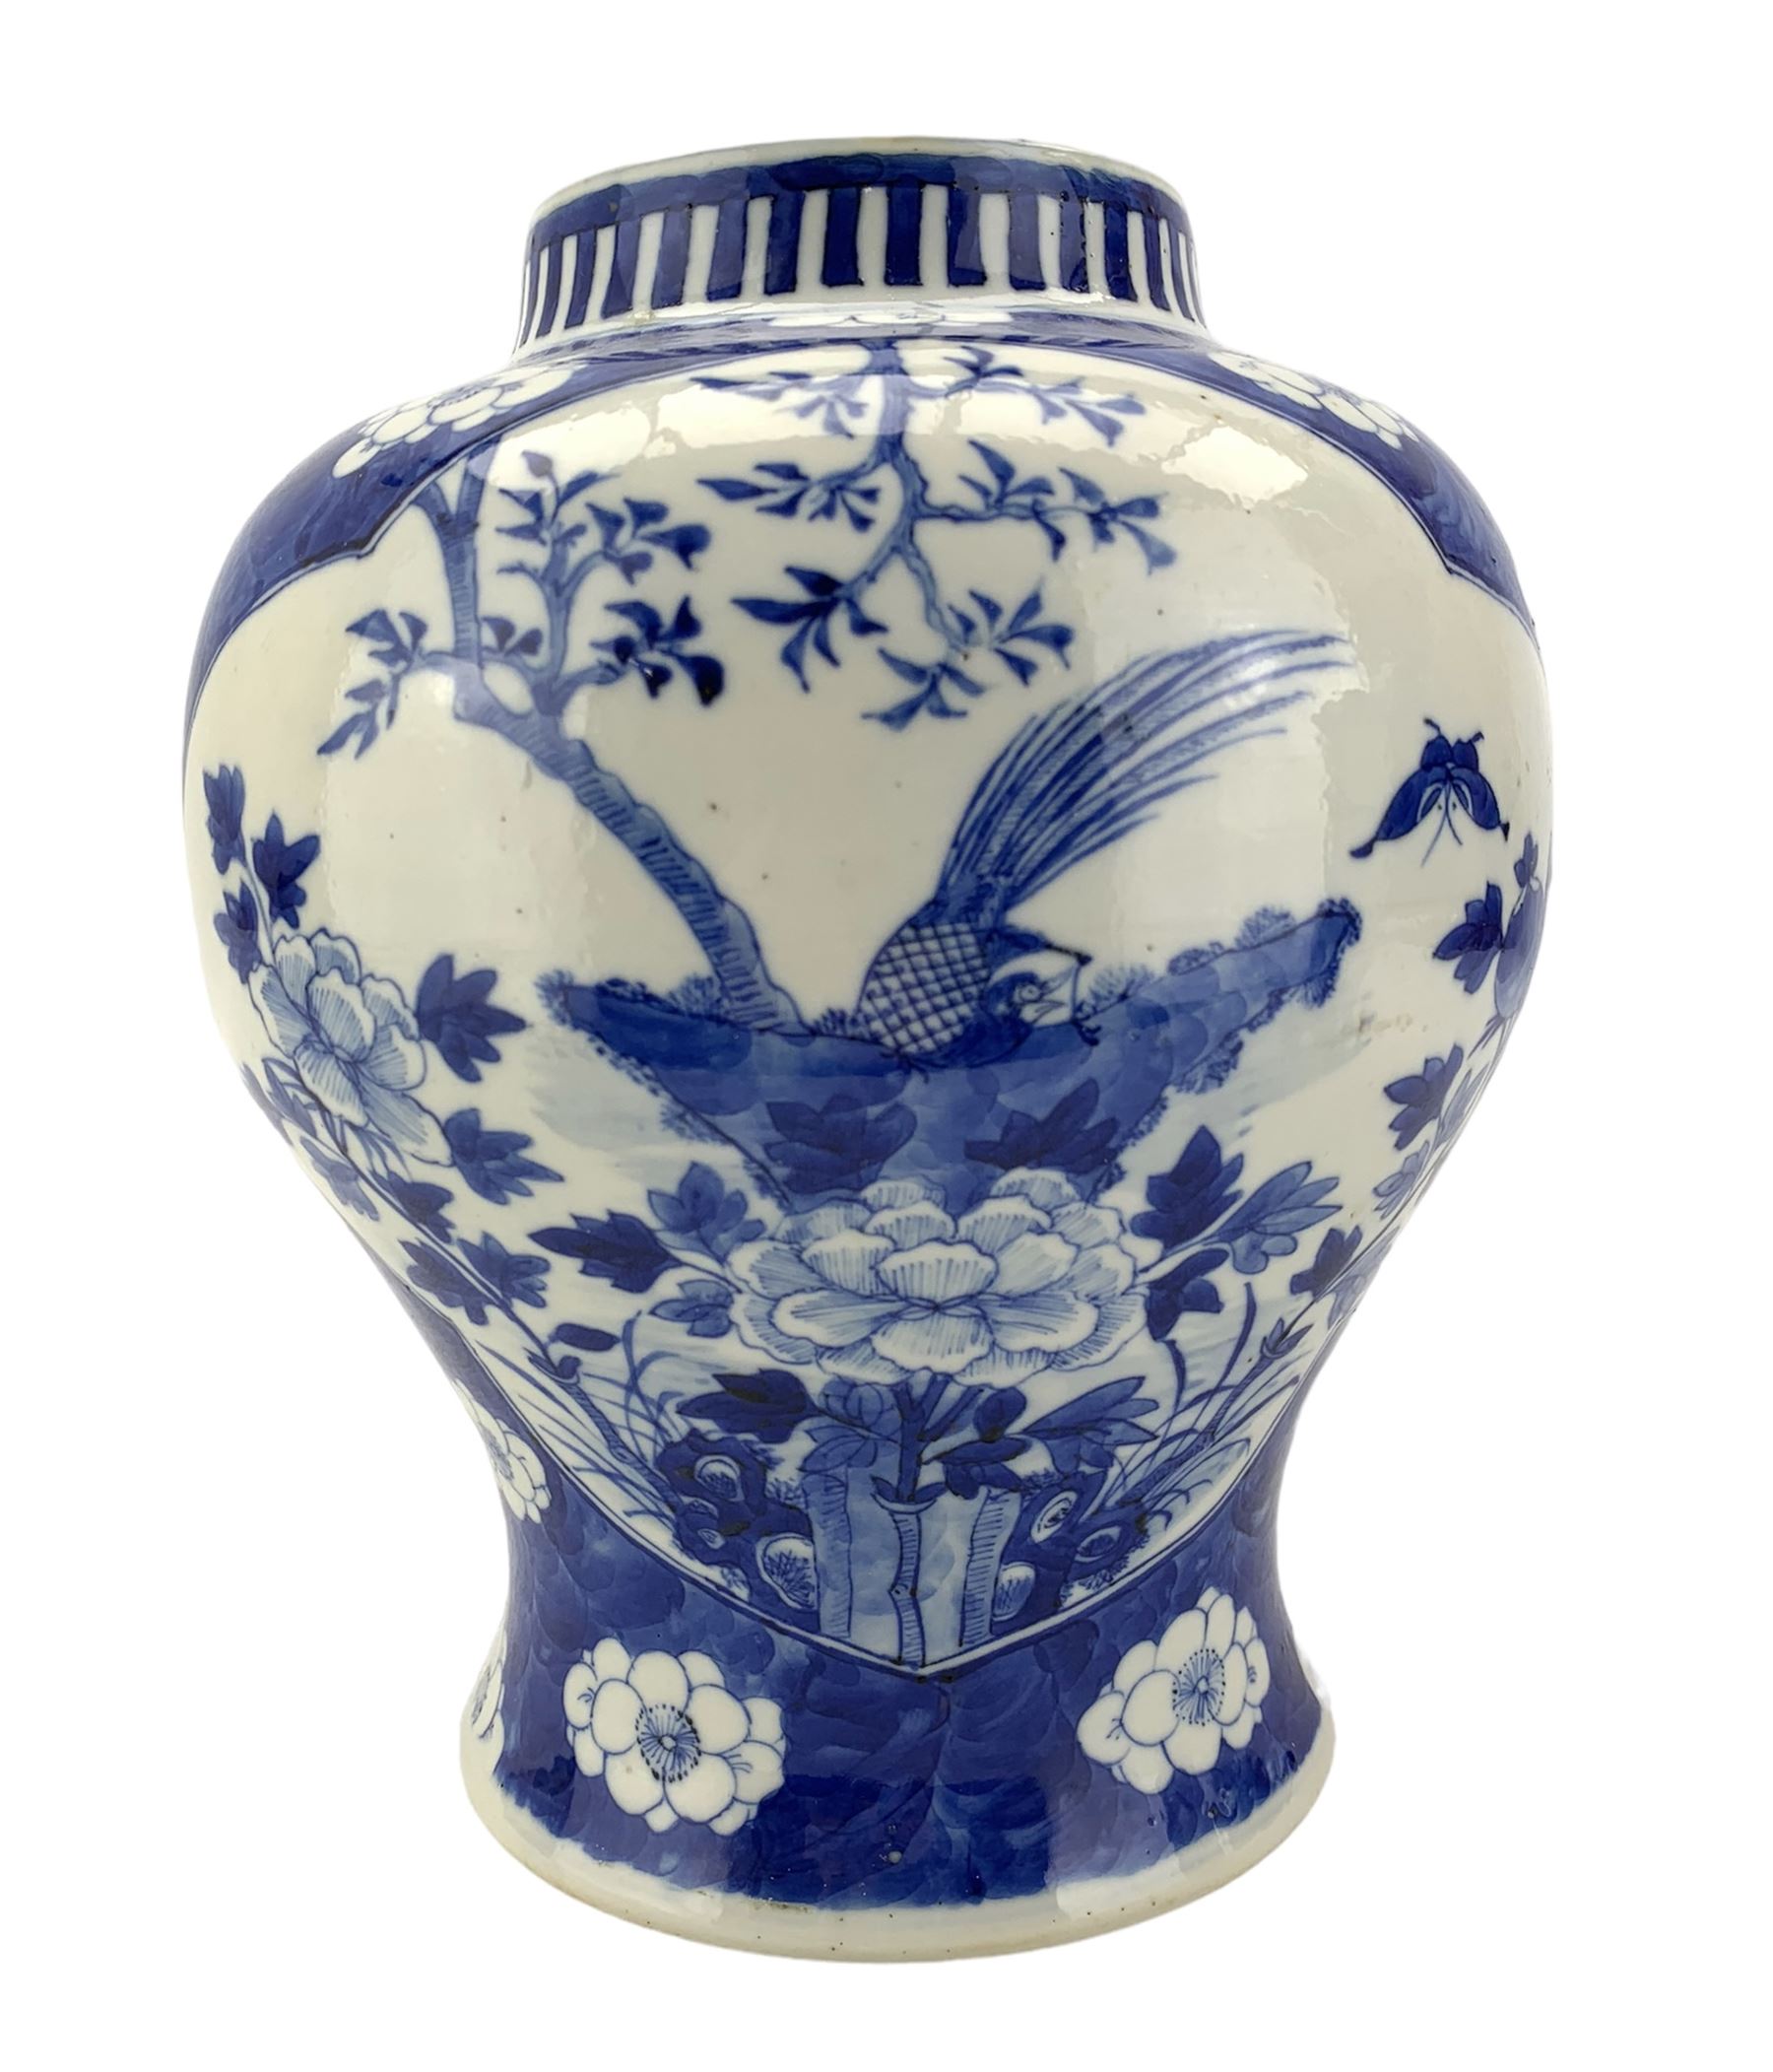 Late 19th century Chinese baluster form jar